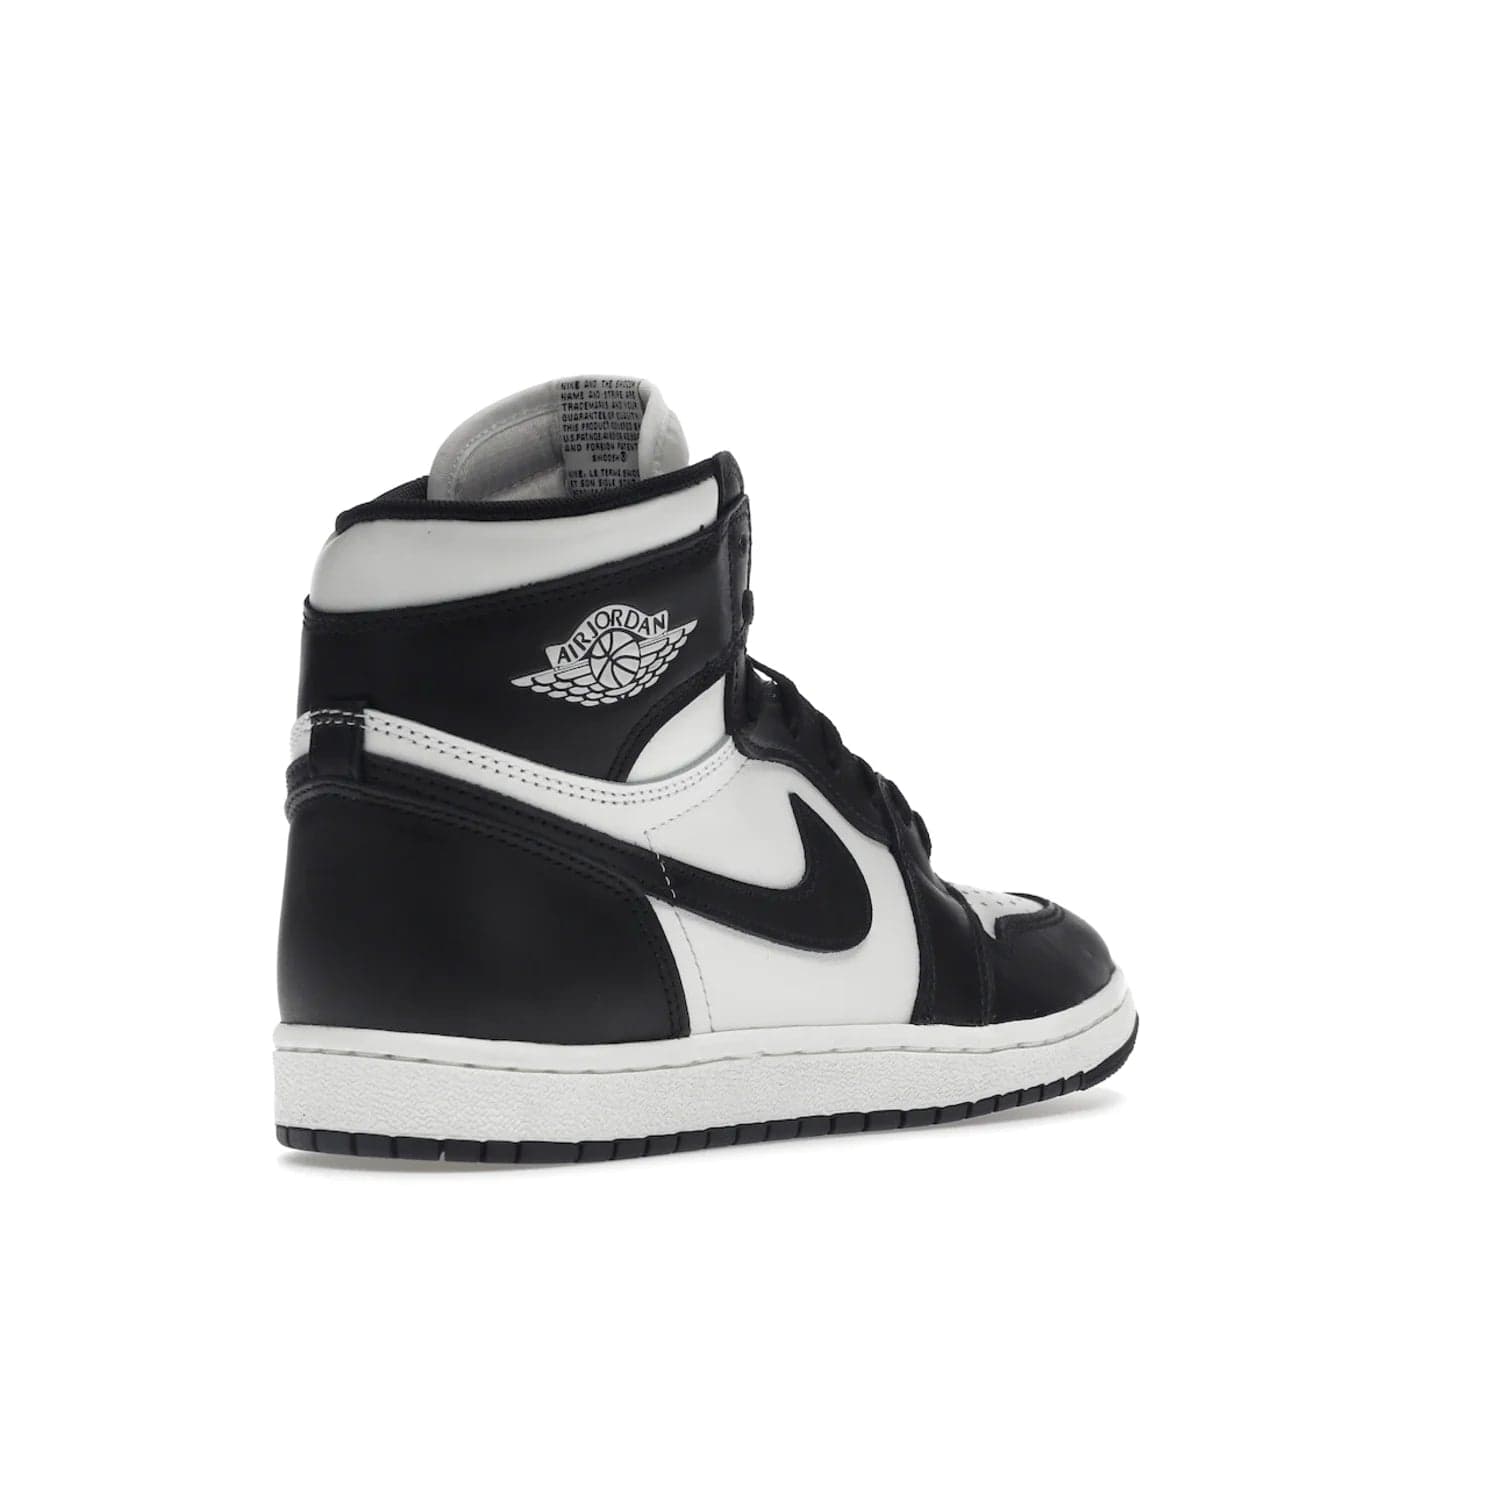 Jordan 1 Retro High 85 Black White (2023) - Image 32 - Only at www.BallersClubKickz.com - Brand new Jordan 1 Retro High 85 Black White (2023) now available. A classic color scheme of black and white leather uppers with signature Nike Air logo on the tongue. Must-have for any Air Jordan fan. Available February 15, 2023.